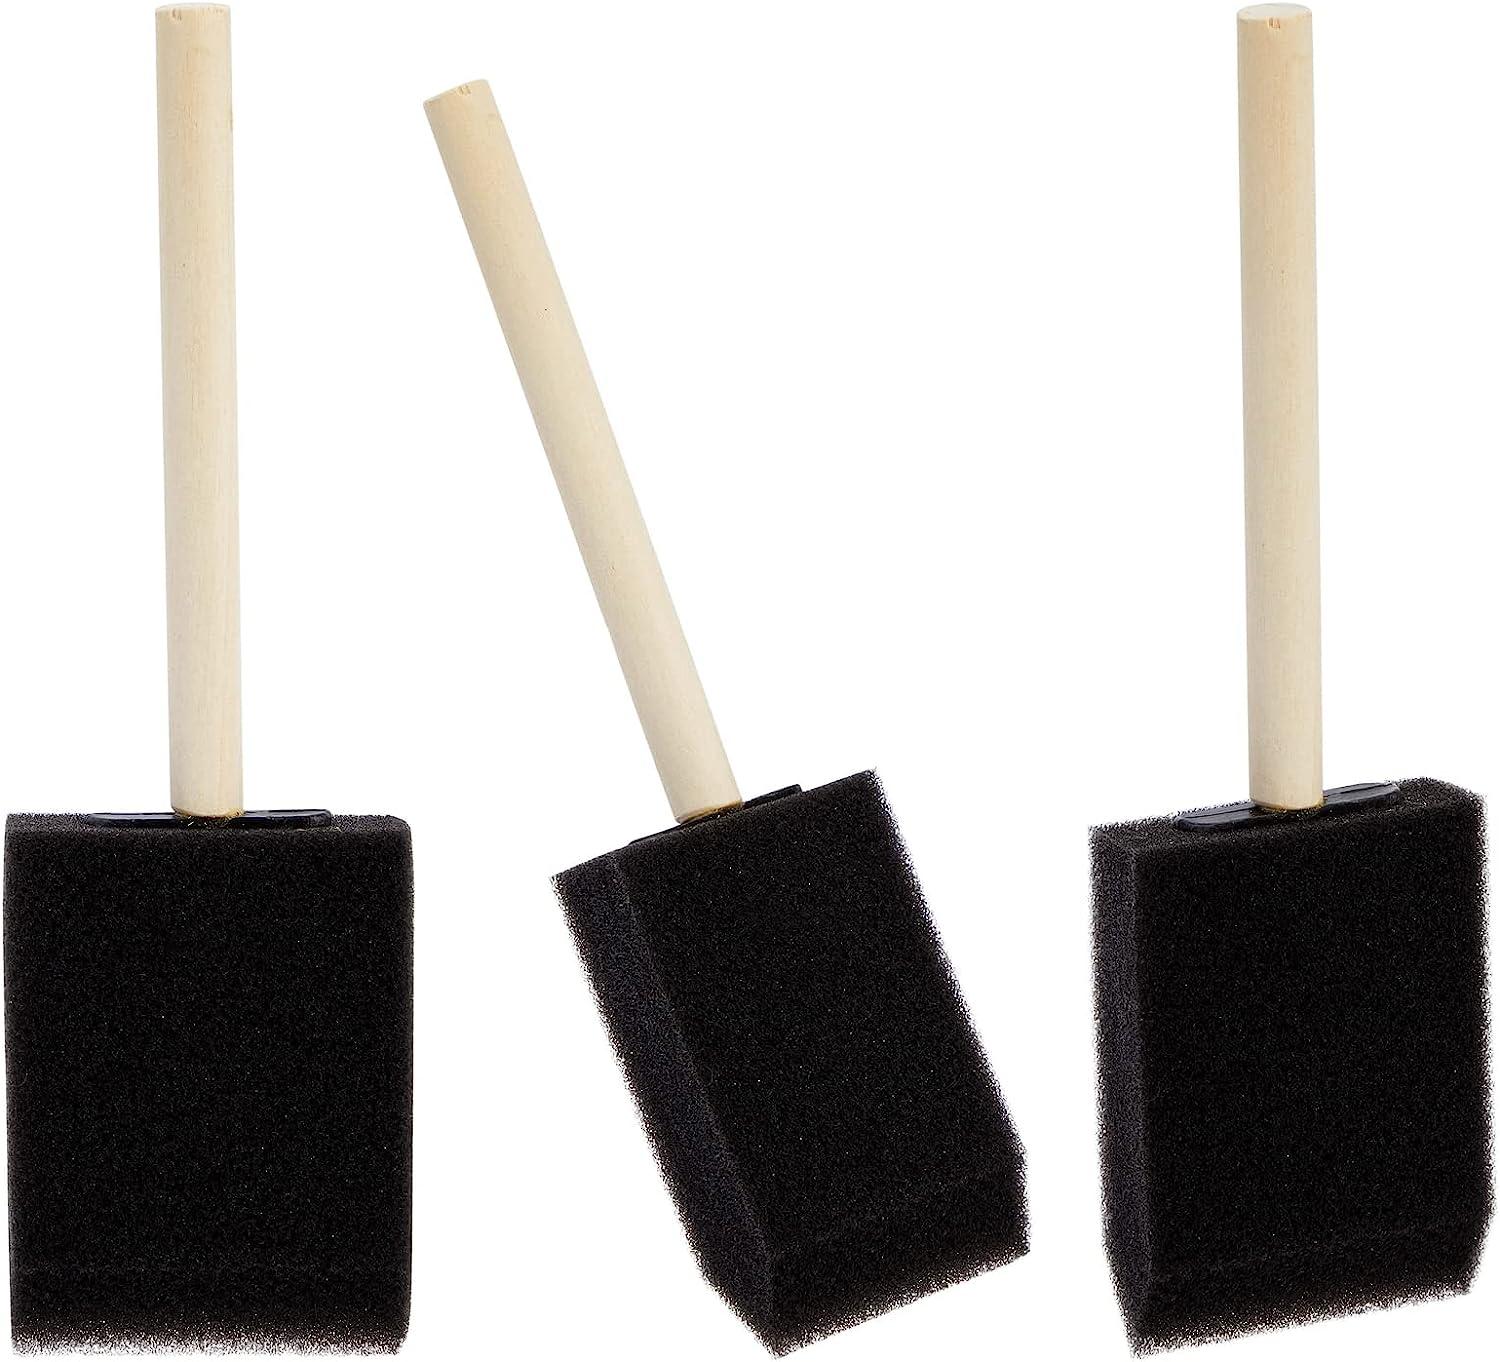 60-Pack of Foam Paint Brushes with Wooden Handle, 2 Inch Sponge